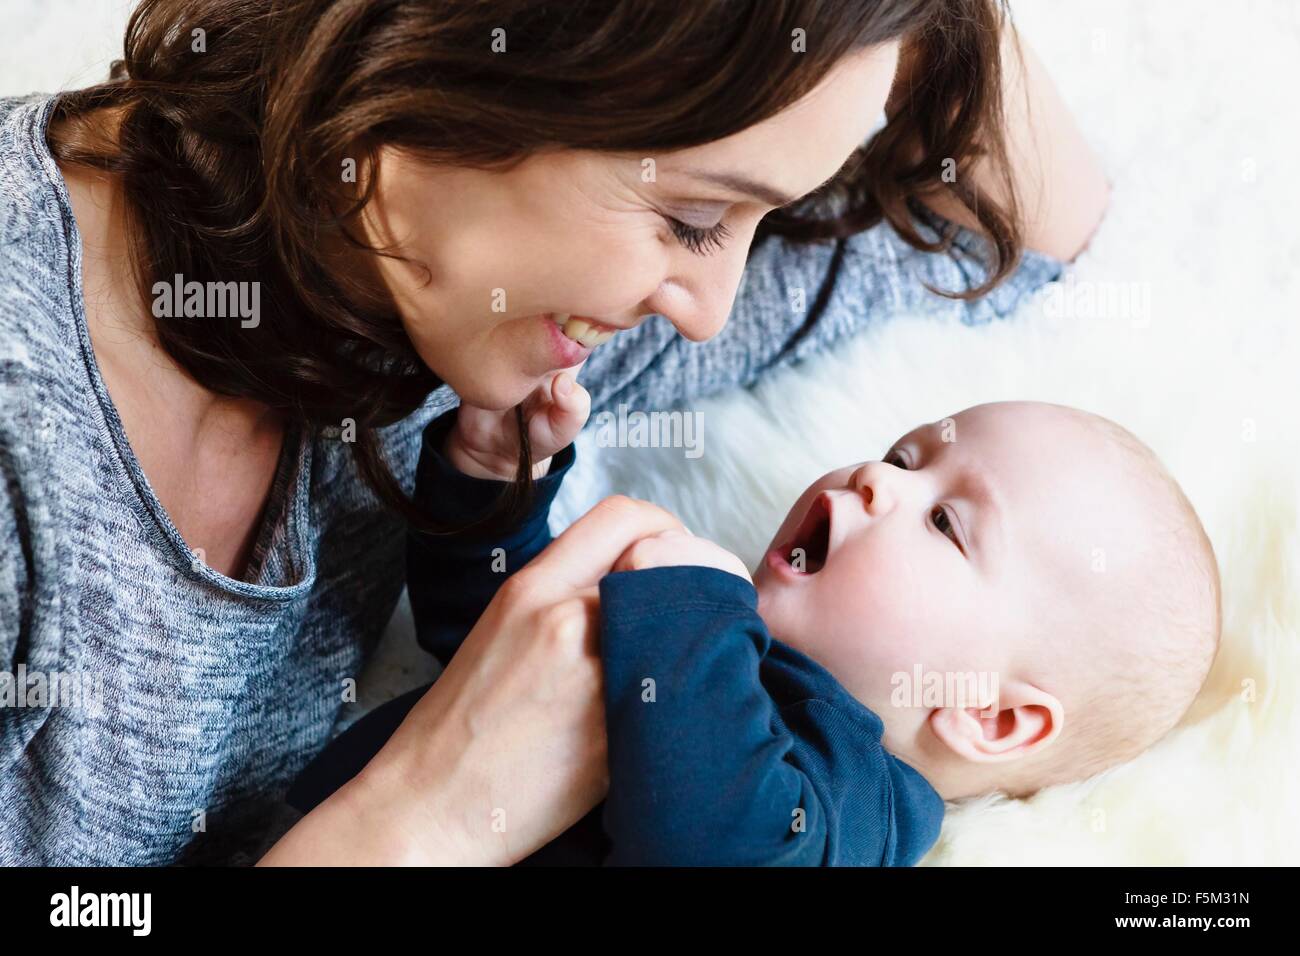 Mother smiling at her baby boy Stock Photo